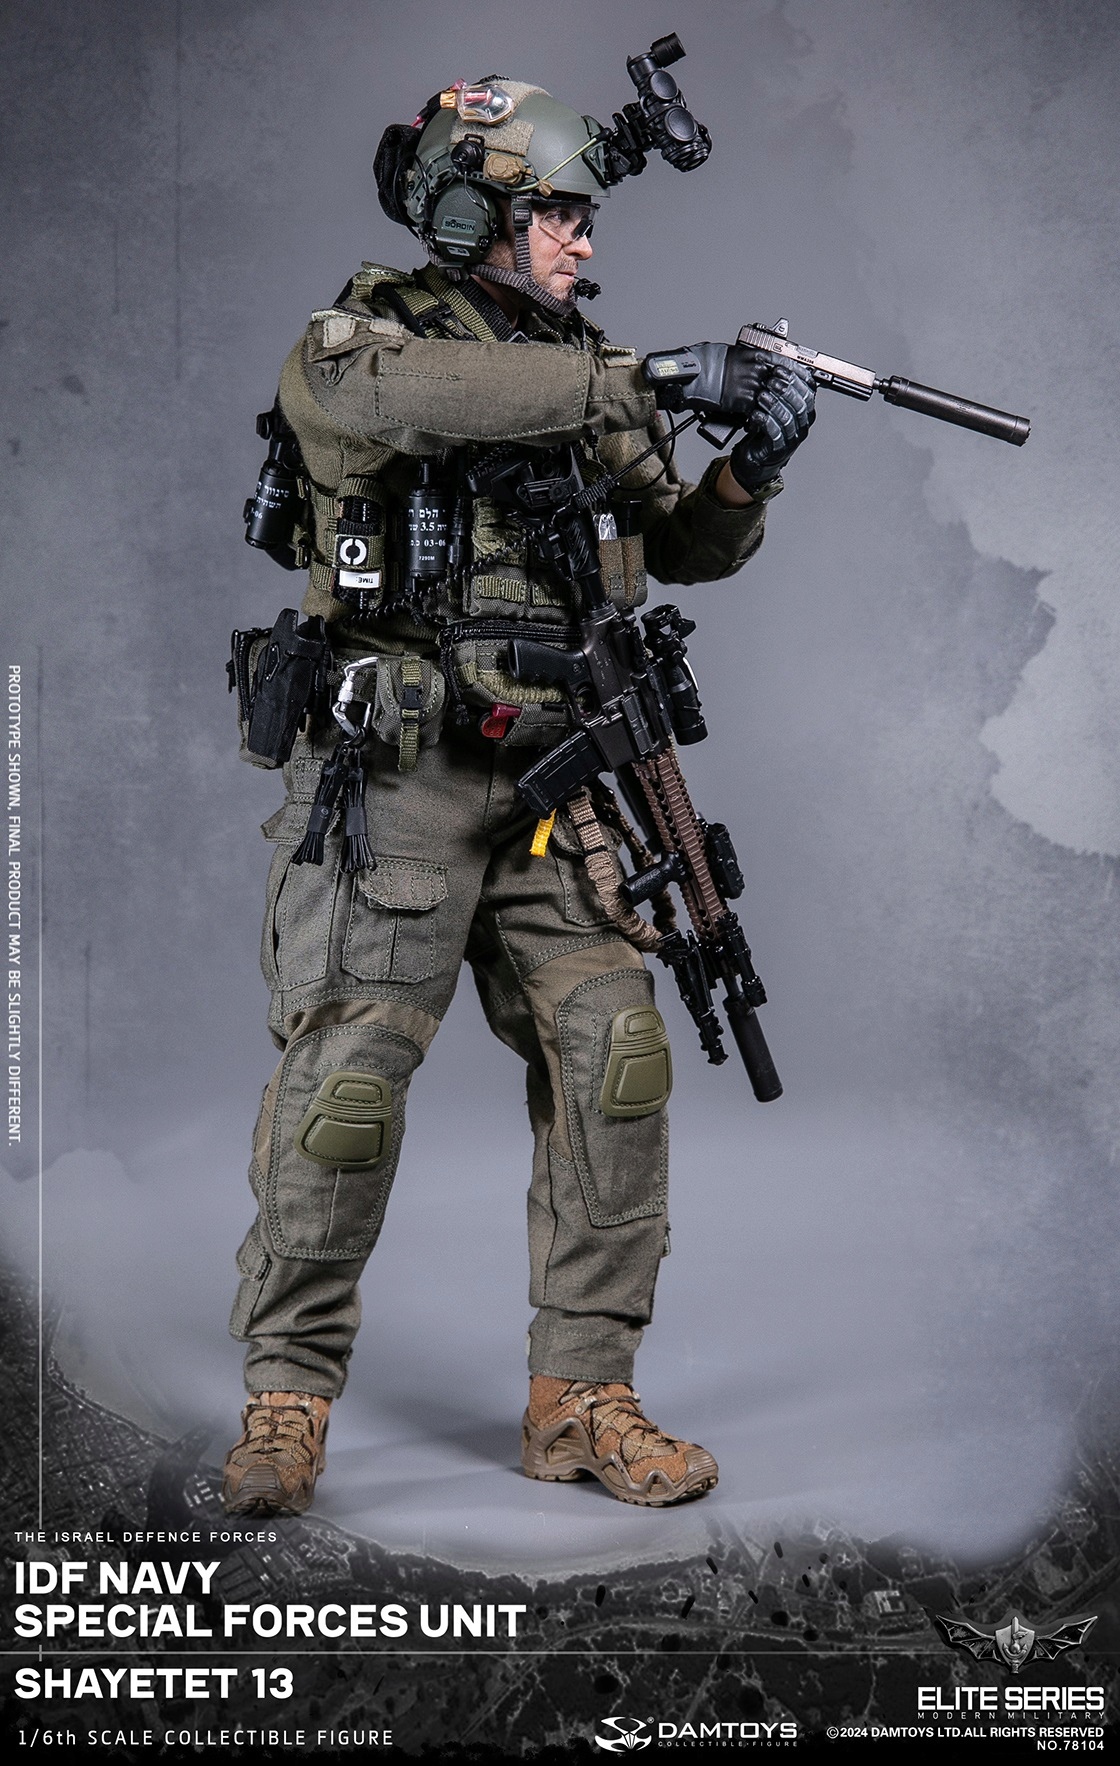 military - NEW PRODUCT: DAMTOYS - Israeli IDF Naval Special Forces-13th Commando #78104 15200